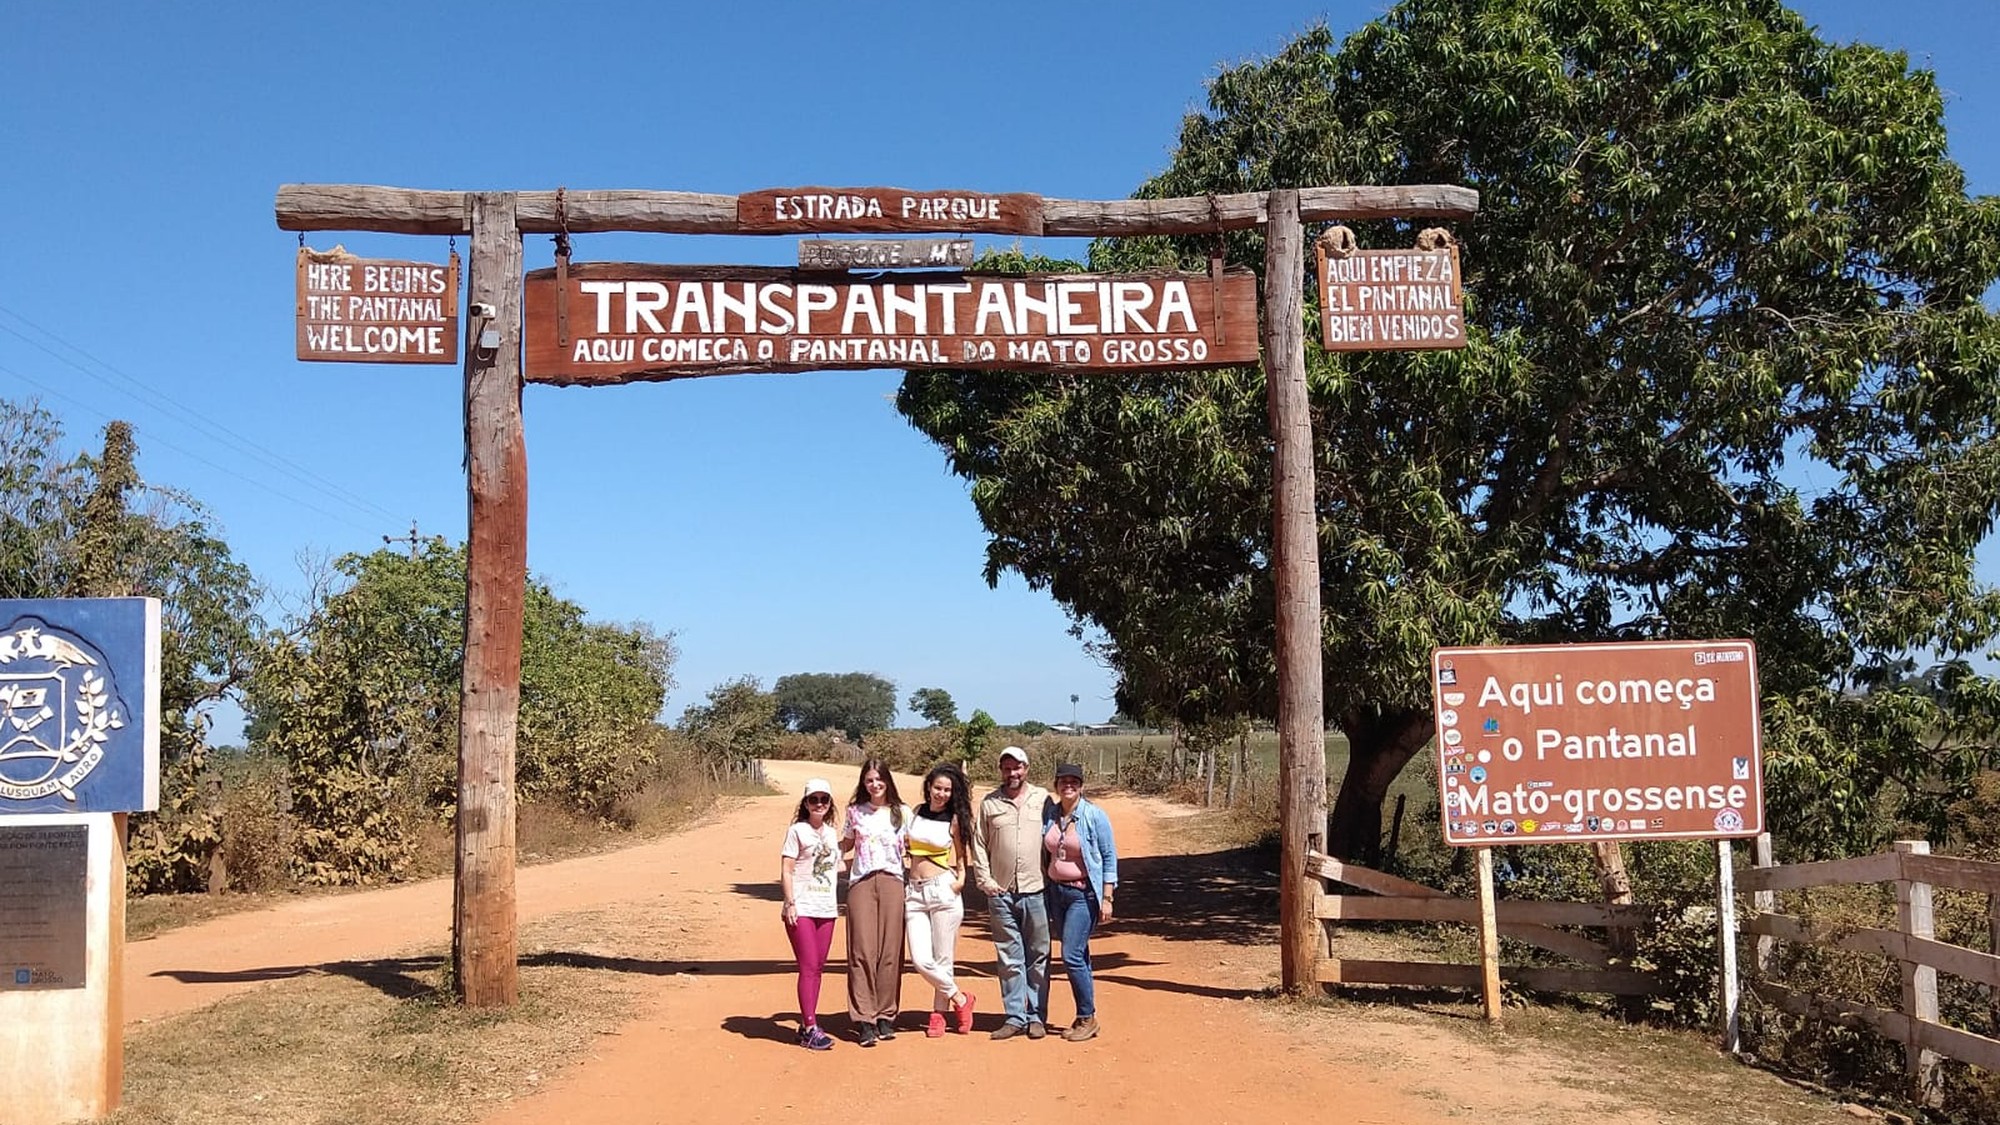 Students from ZHAW, Representatives from Swissnex and Sesc at the entrance of Pantanal Natural Reserve